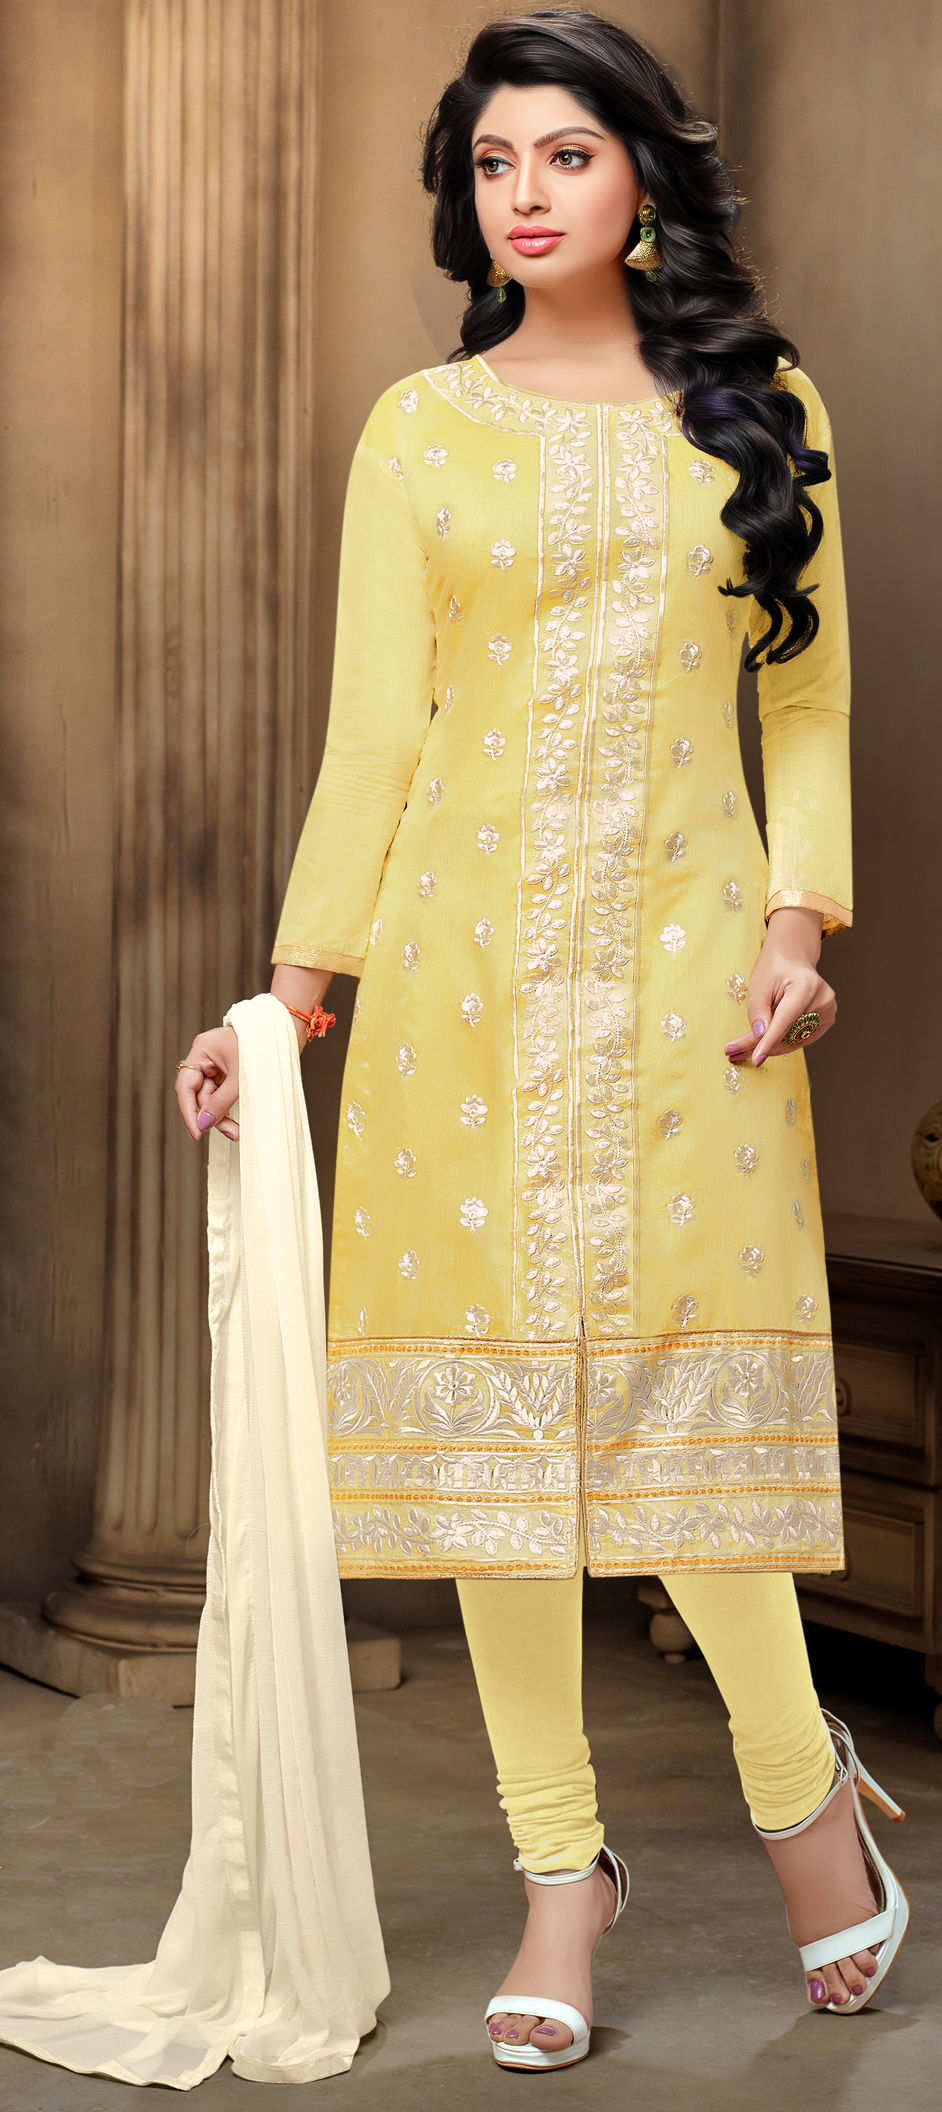 493007: Yellow color family unstitched Party Wear Salwar Kameez